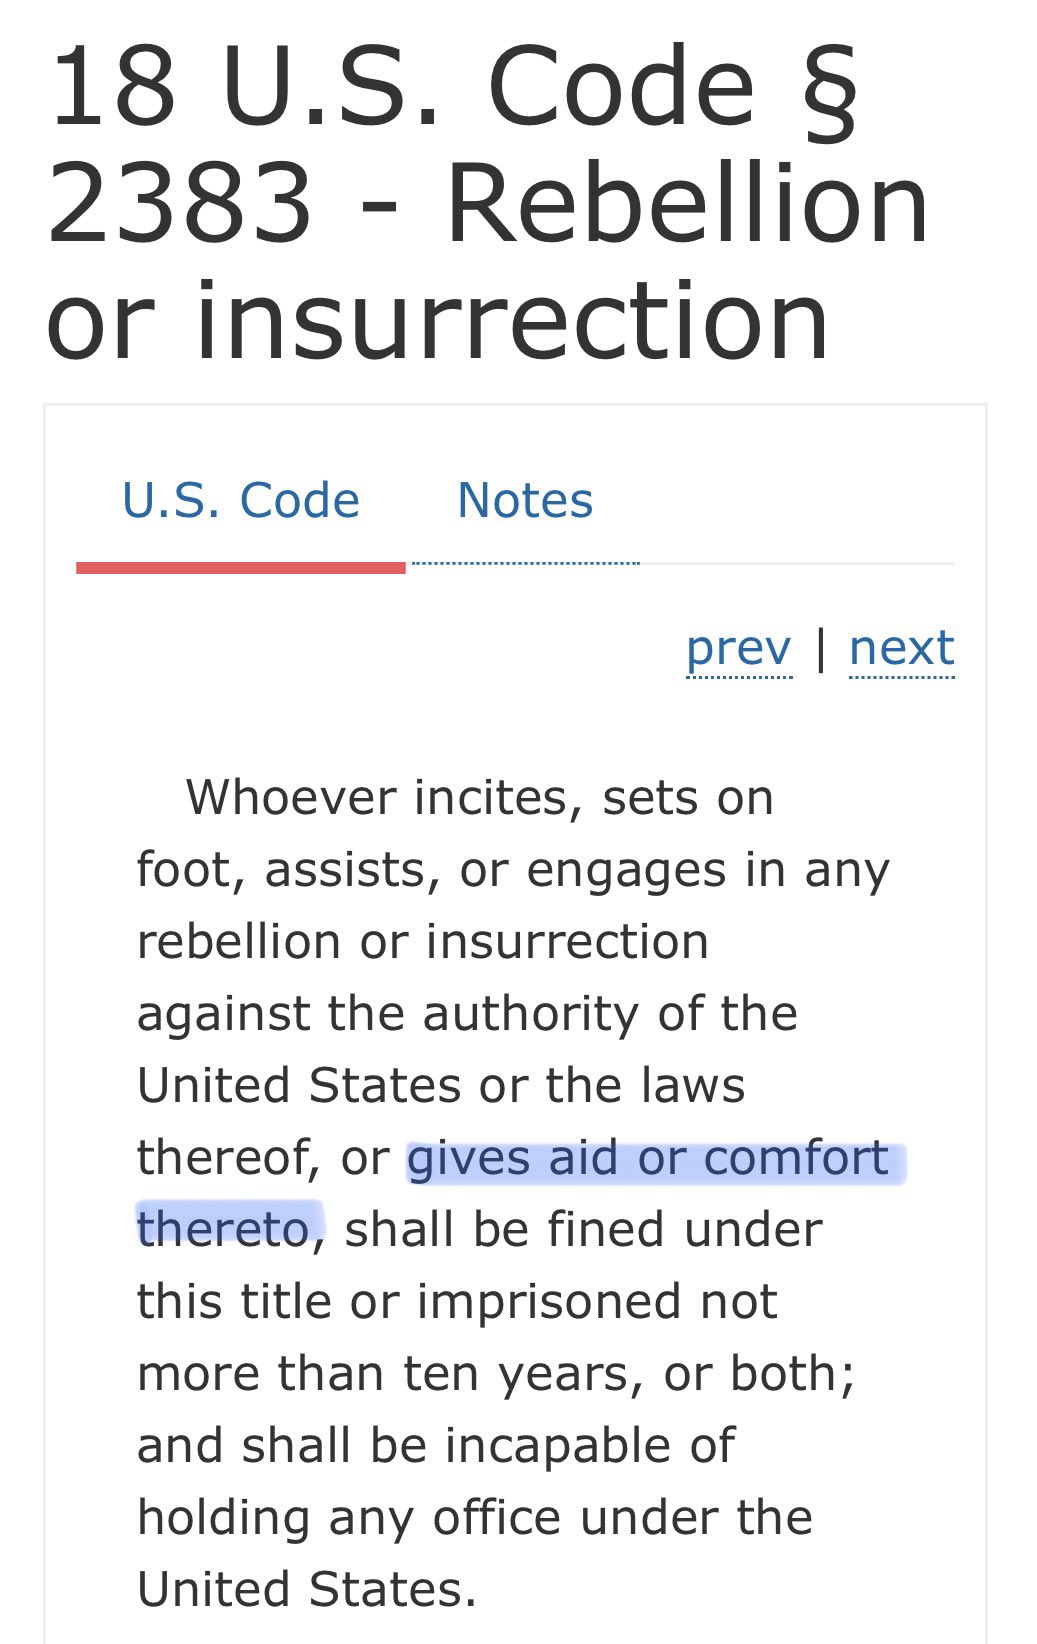 Law Against aid comfort to insurrection.jpg